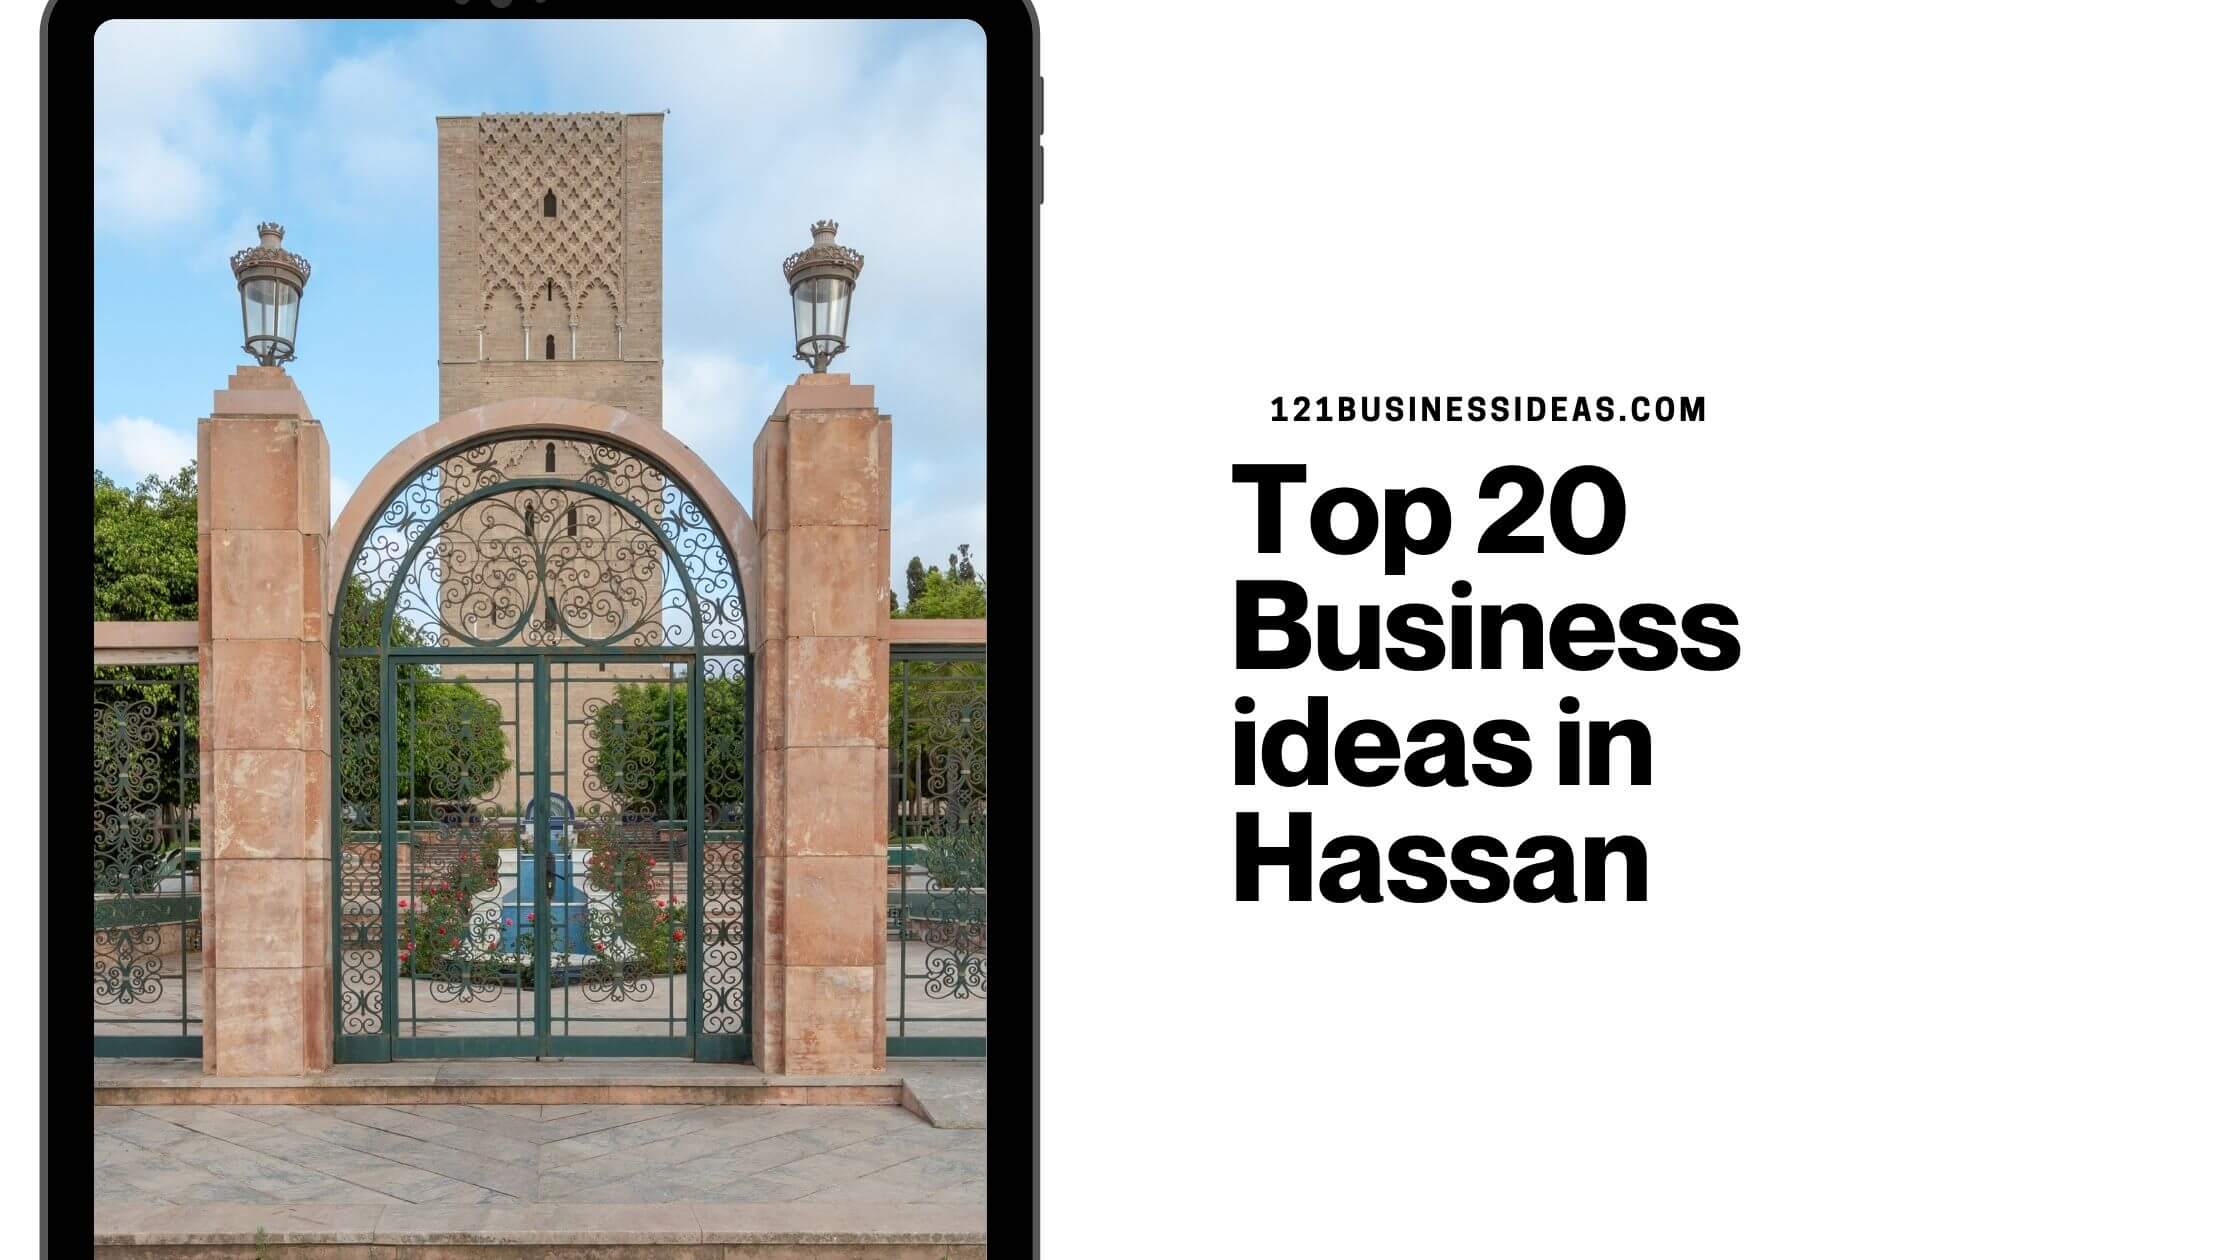 Top 20 Business ideas in Hassan (1)